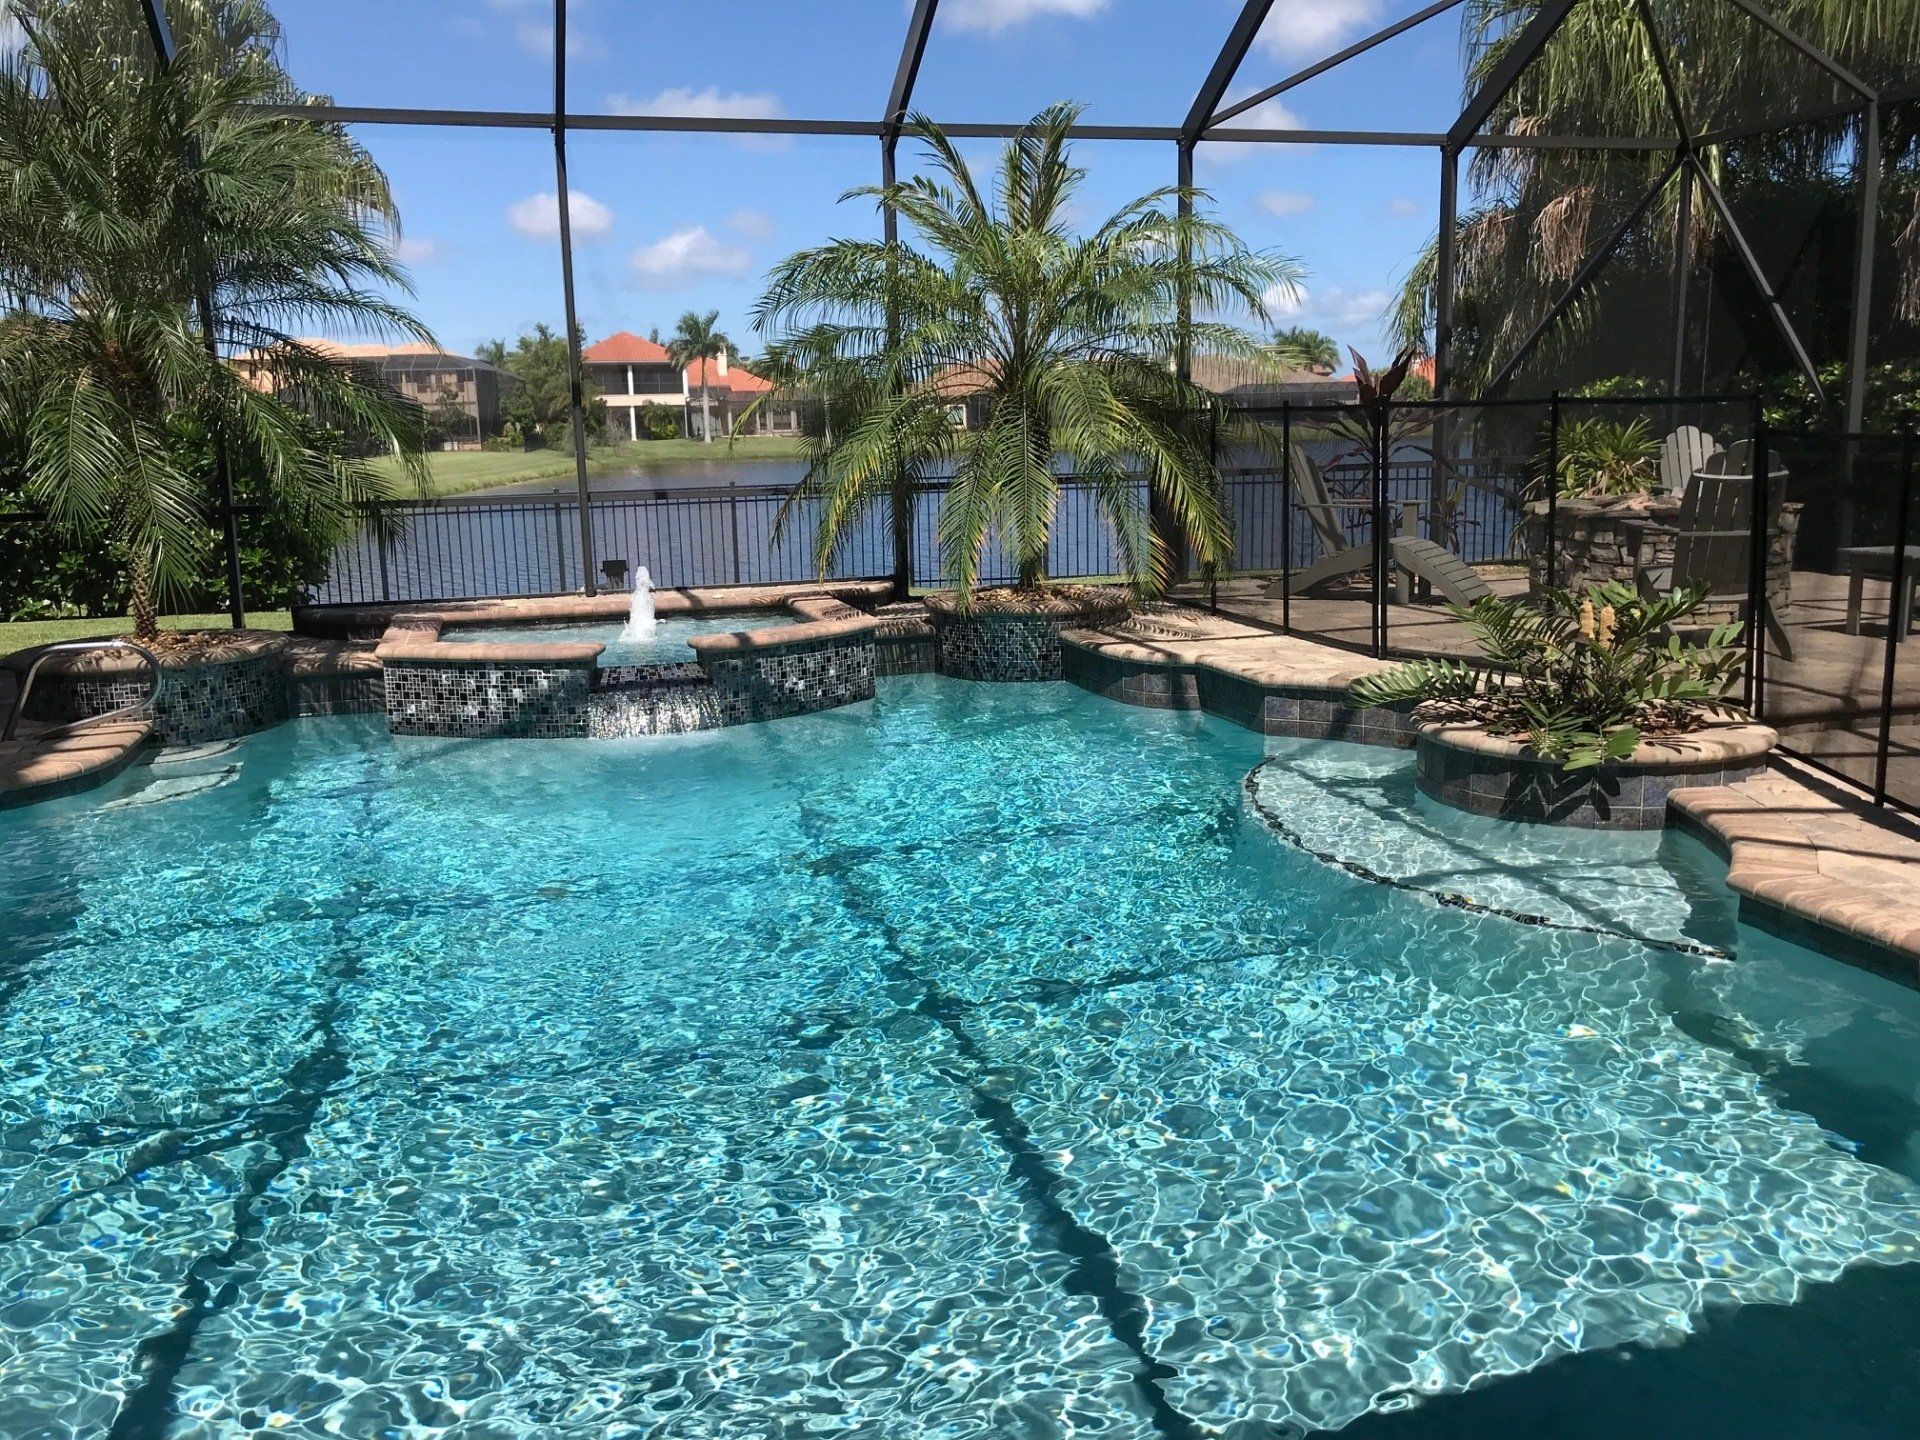 Pool Cleaning Services on Rockledge, FL